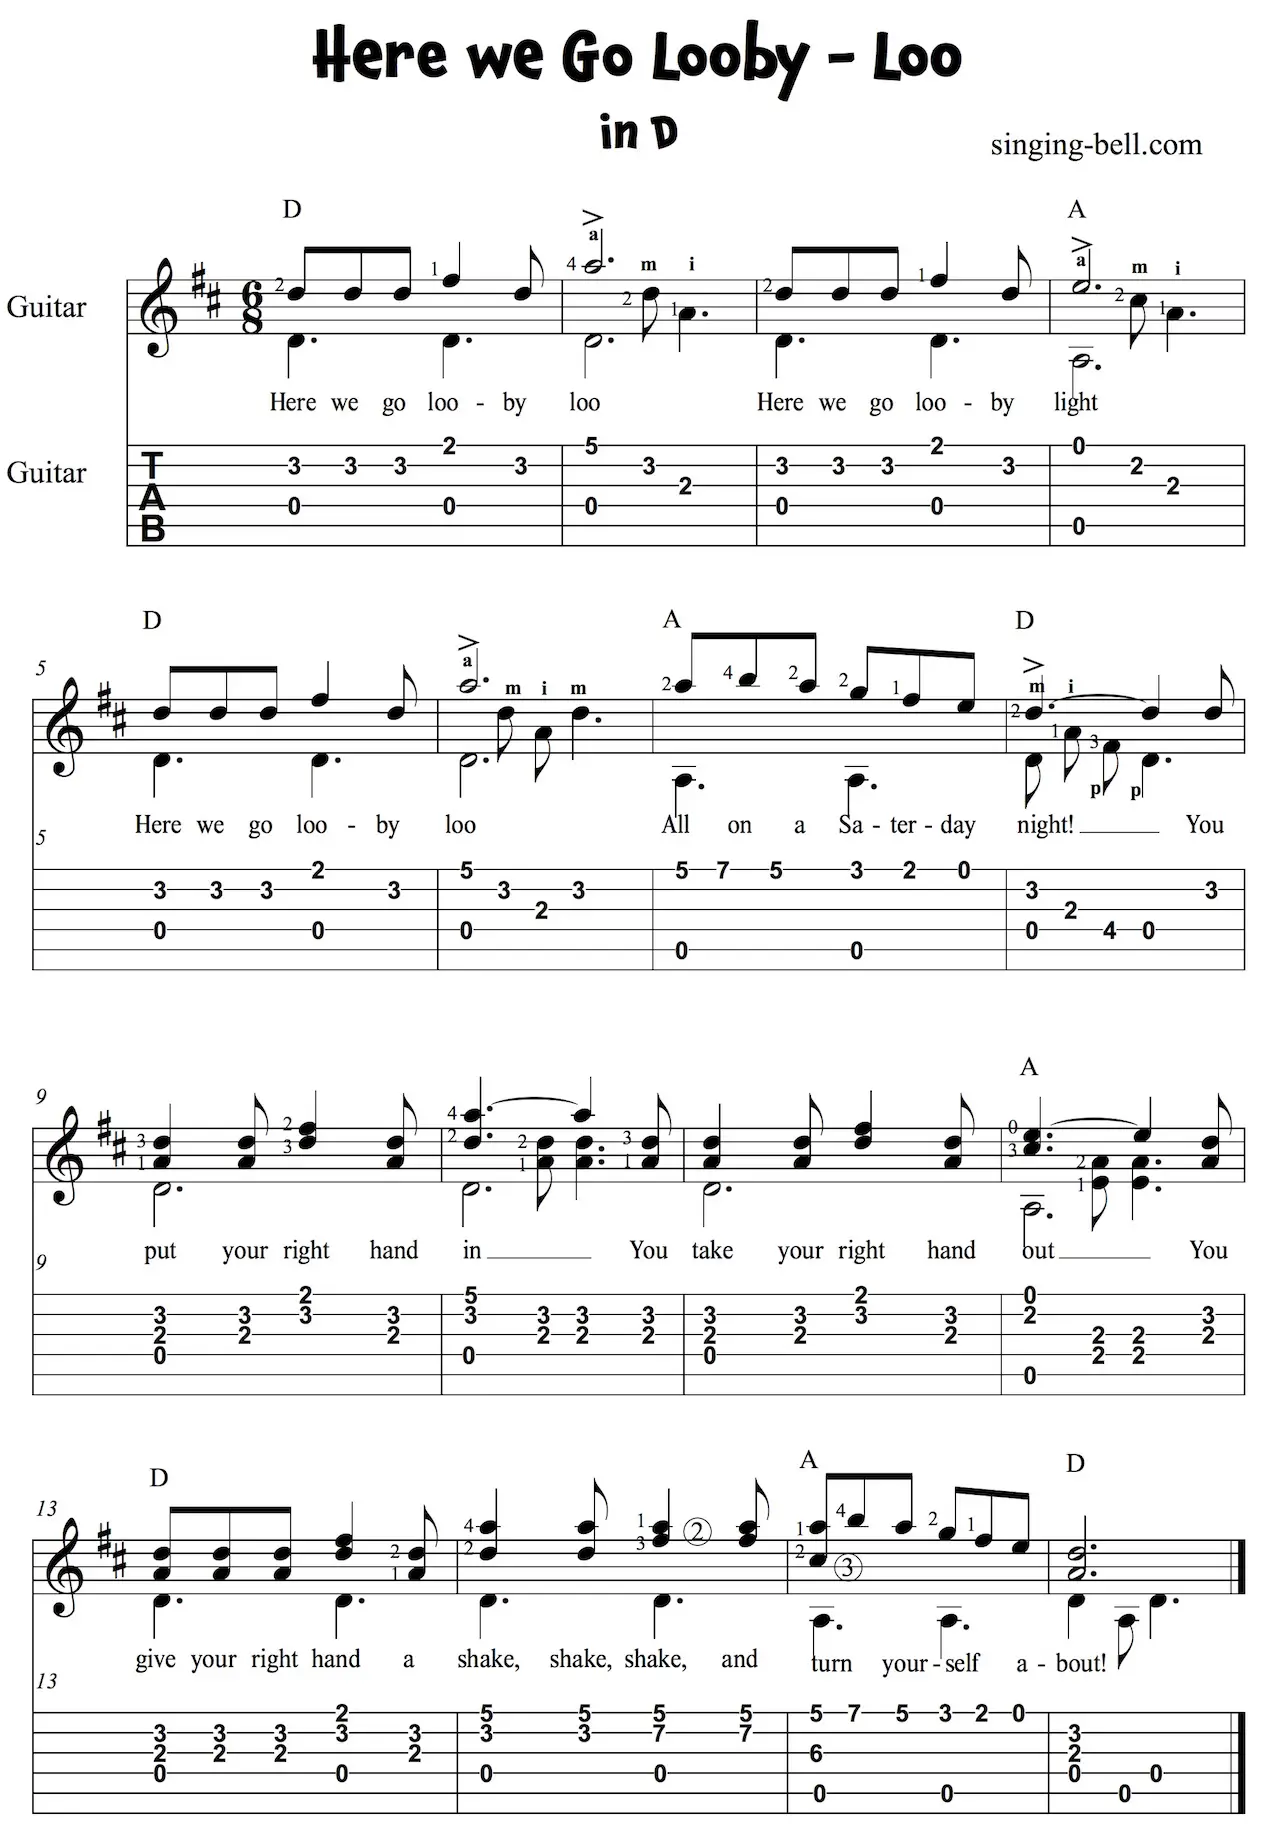 Here We Go Looby Loo Easy Guitar Sheet Music with notes and tablature in D.